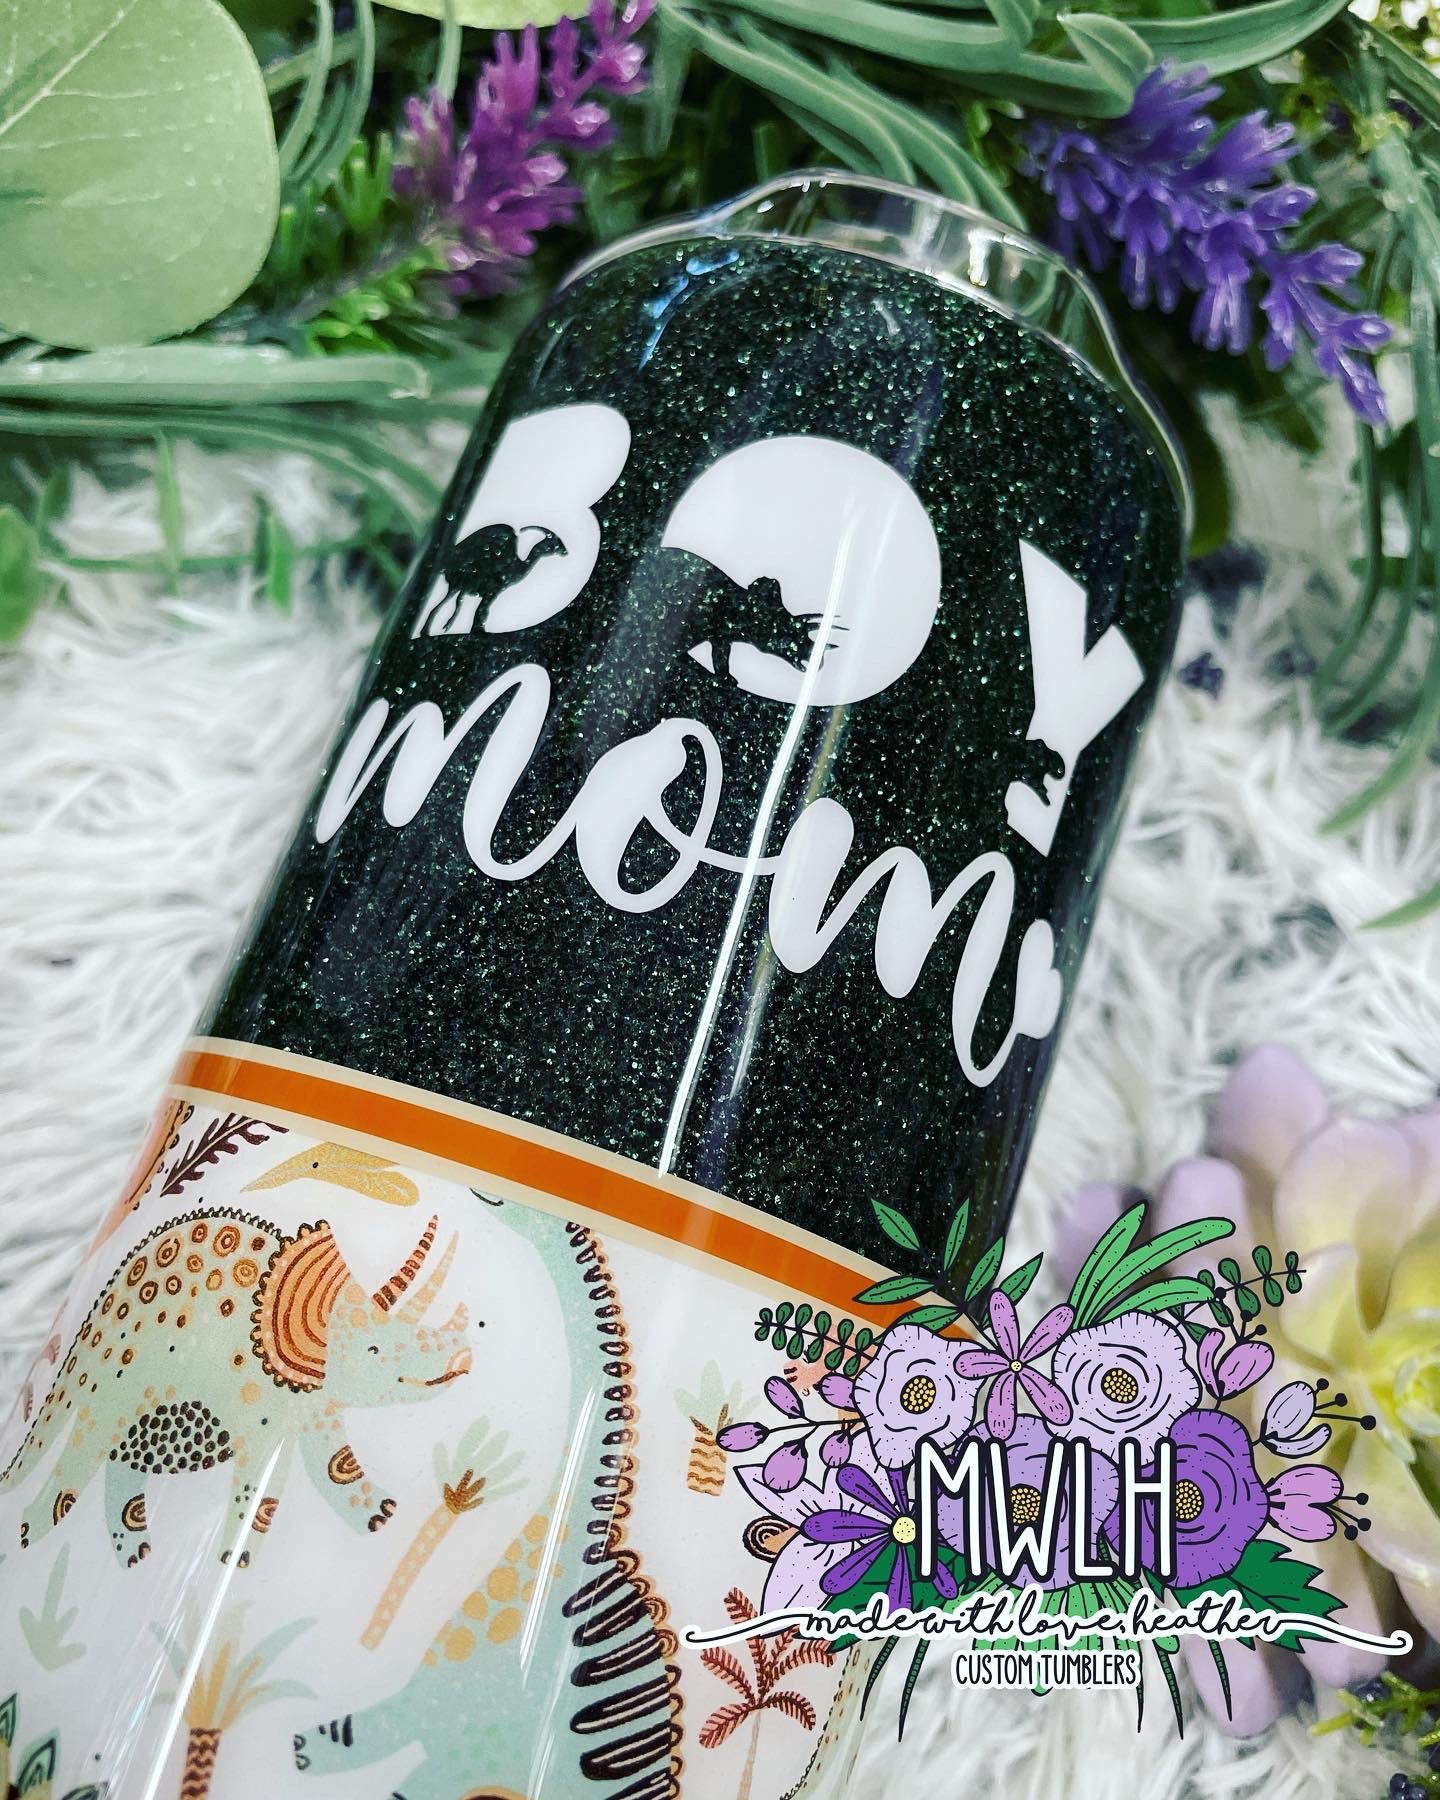 Don't Mess With Mamasaurus 20oz Skinny Tumbler Png for Mom, Dinosaur Mom  20oz Tumbler Png, Dino Mom Colorful Design Tumbler Instant Download